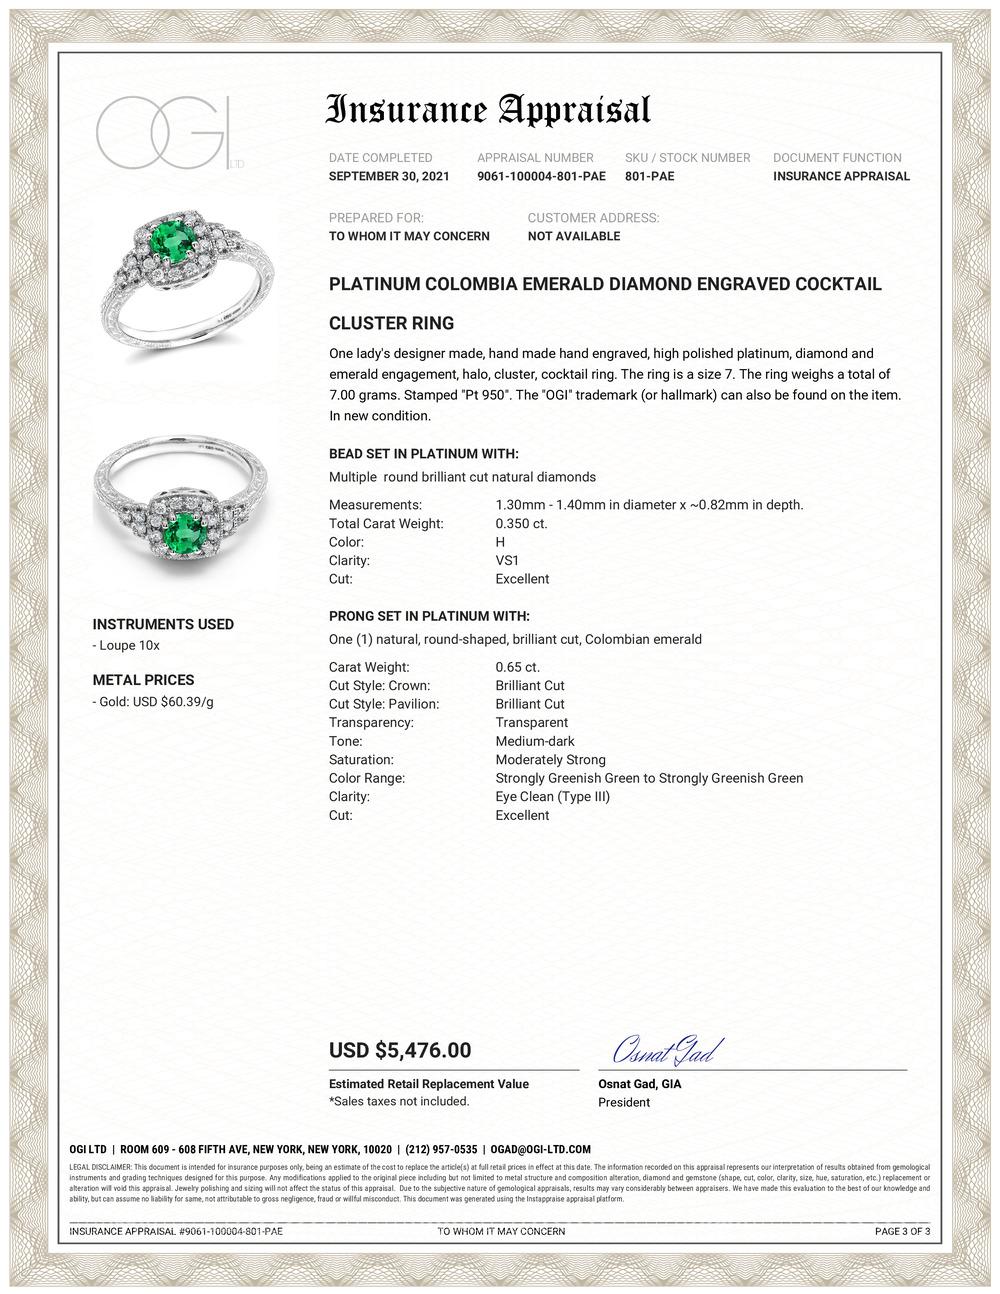 Platinum emerald and diamond cocktail cluster ring 
Round emerald weighing 0.65 carat
Surrounded by pave-set diamonds weighing 0.35 carats    
Ring size 7 In Stock
The ring can be slightly resized
Ring shank measuring 3.3 millimeter 
New Ring
OGI